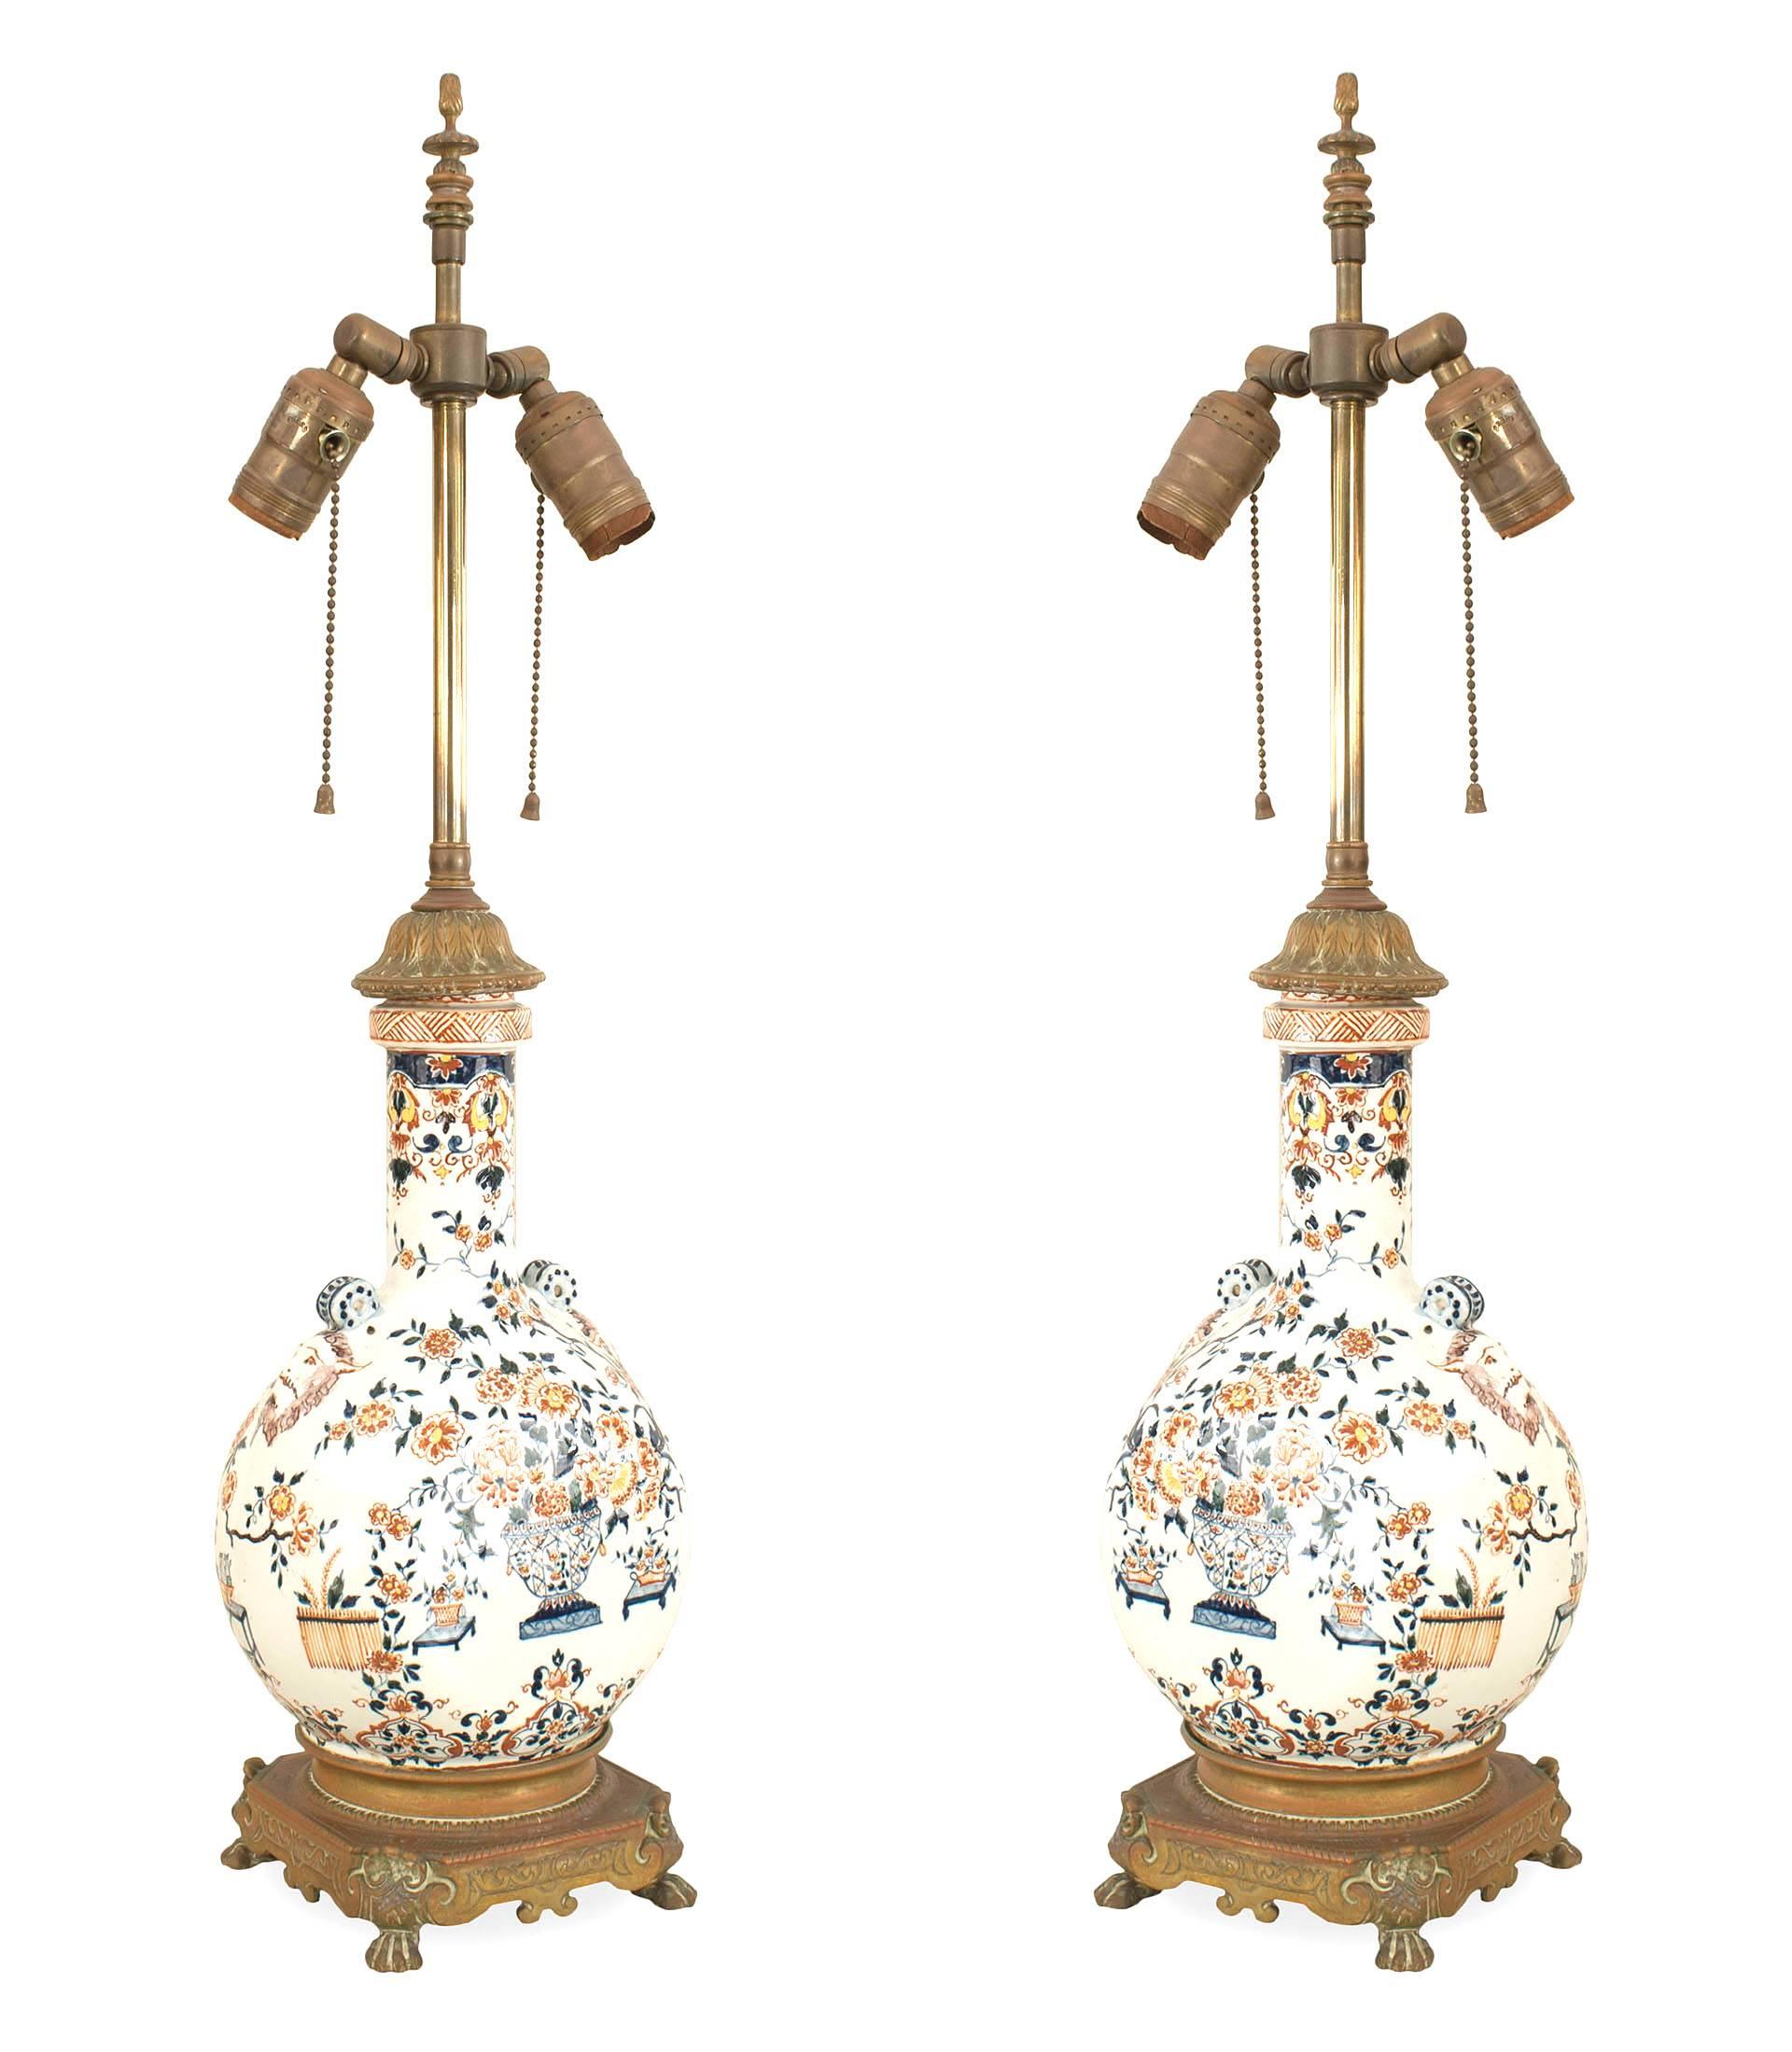 Pair of English Victorian Pilgrim shaped white porcelain table lamps with red & blue floral decoration and satyr heads having a bronze square base with claw feet (PRICED AS Pair)
